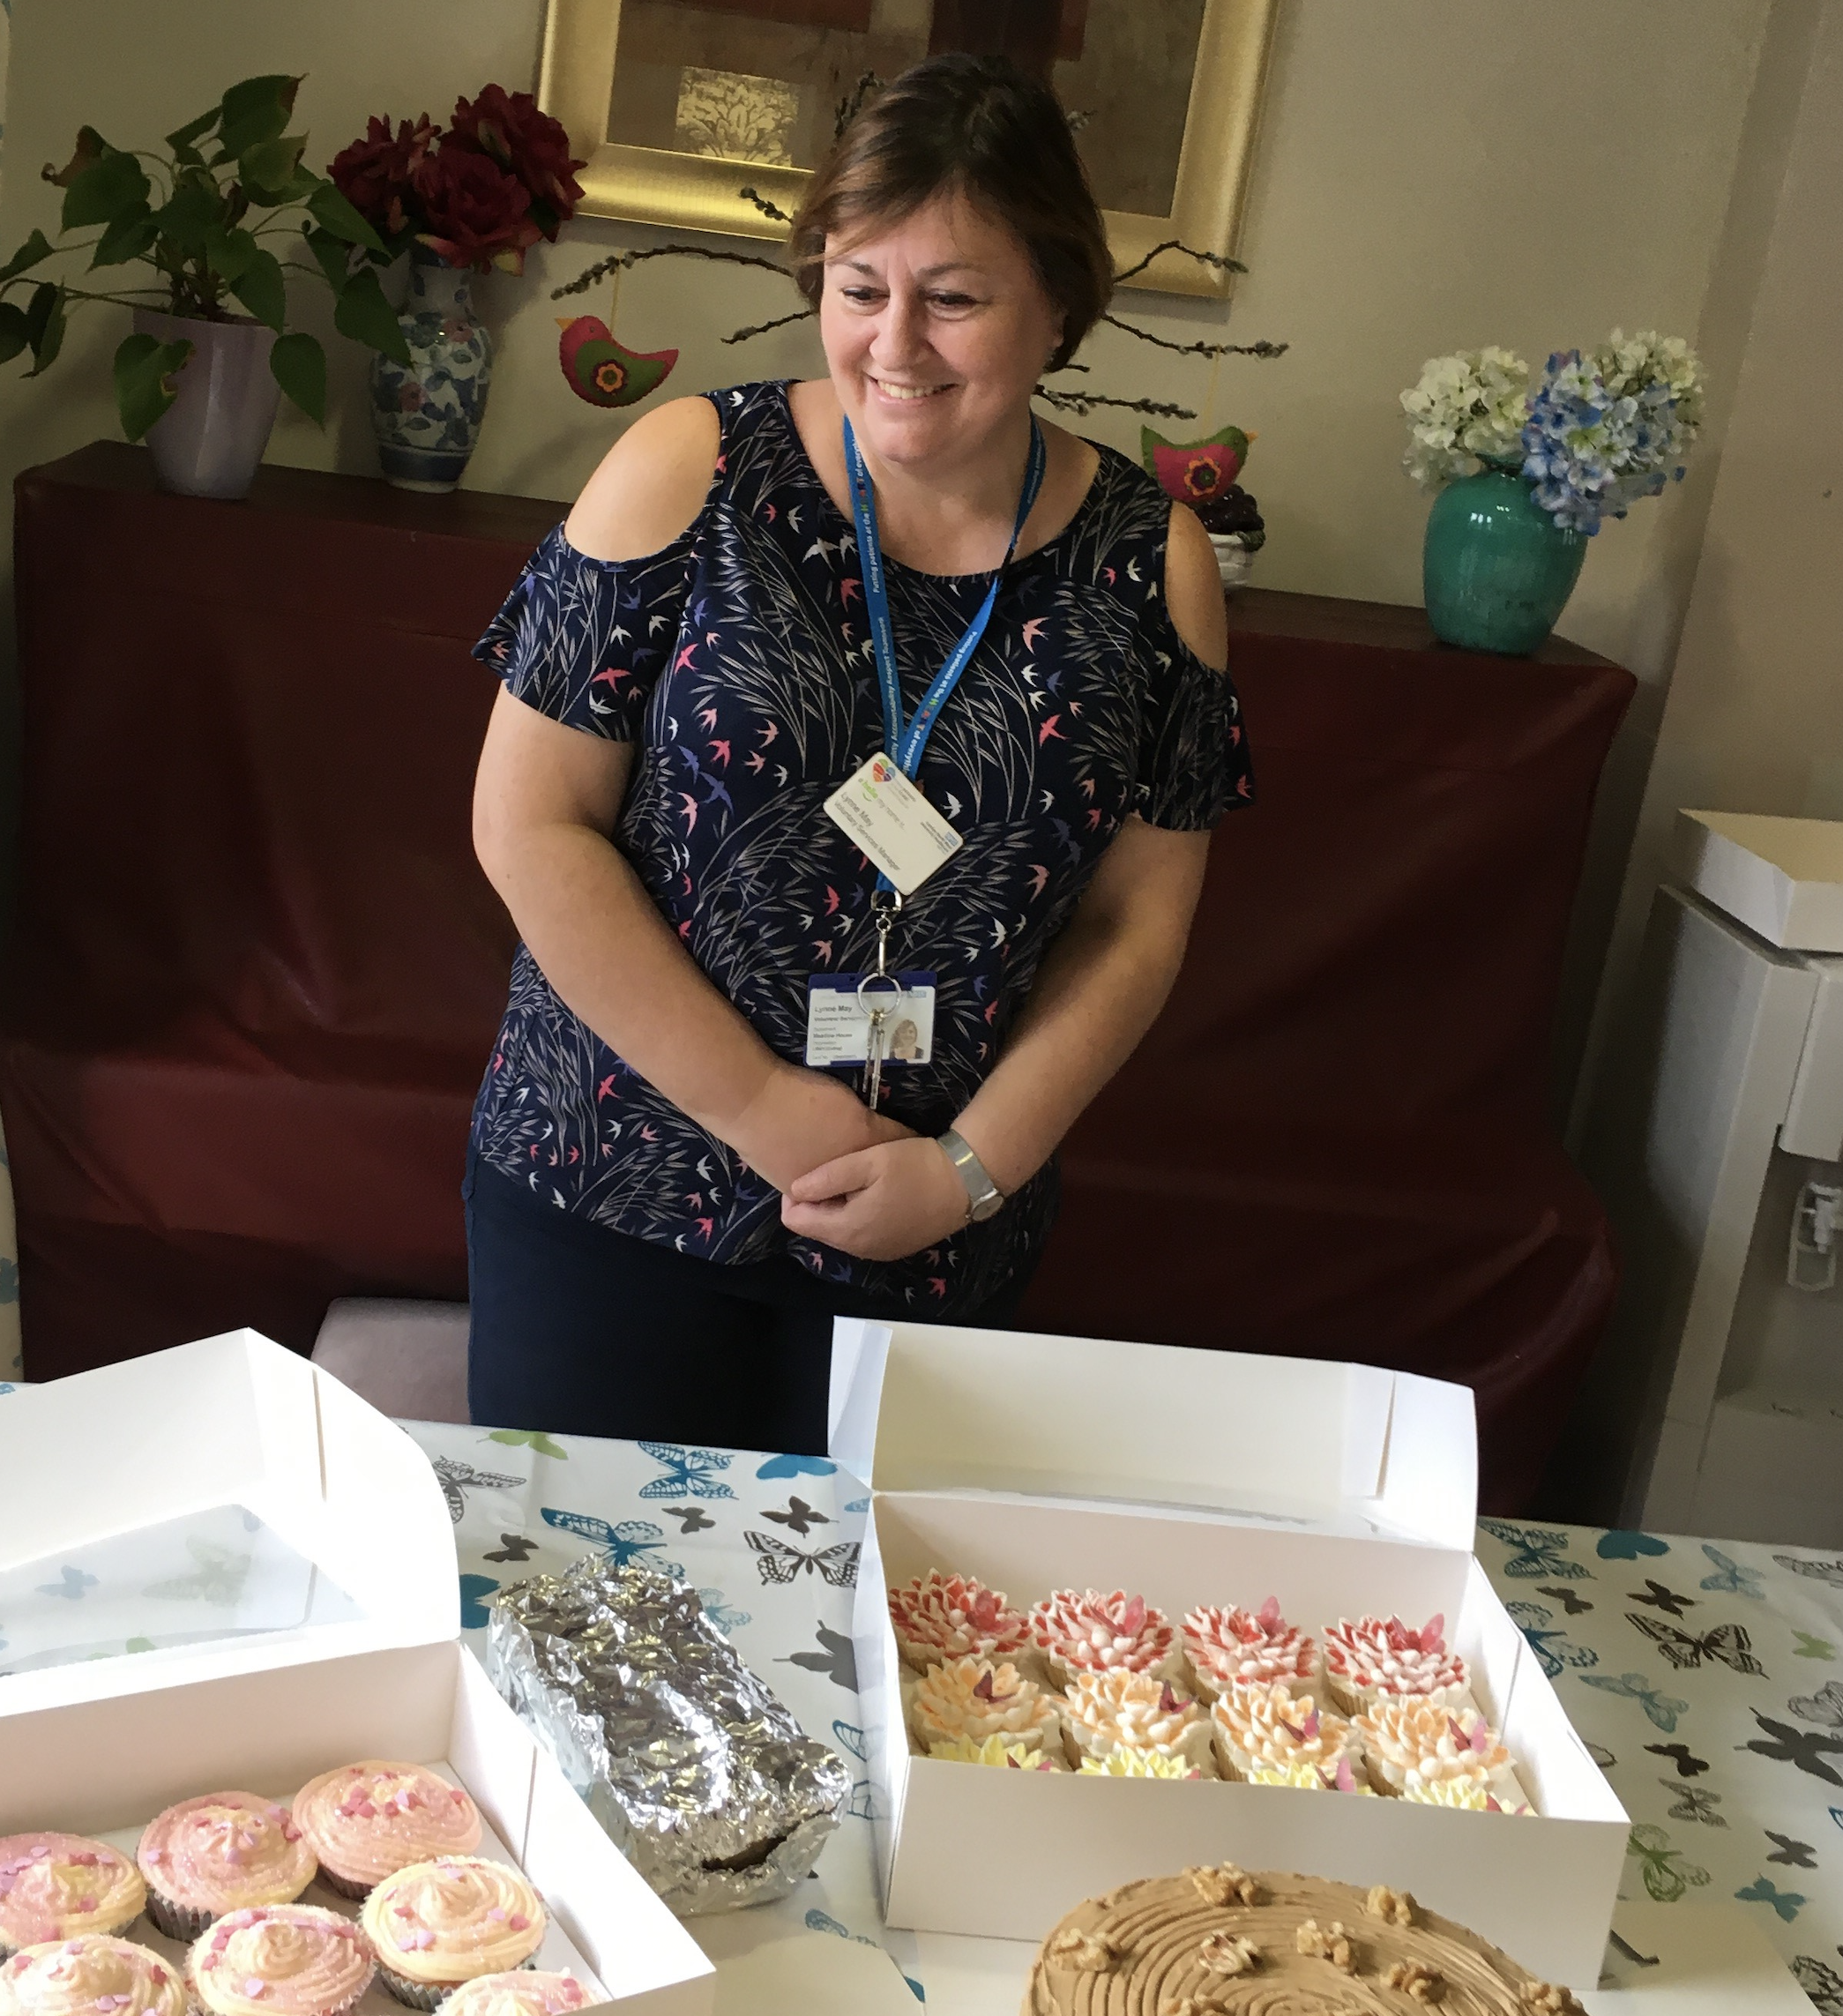 Baking for Meadow House Hospice’s Garden Party